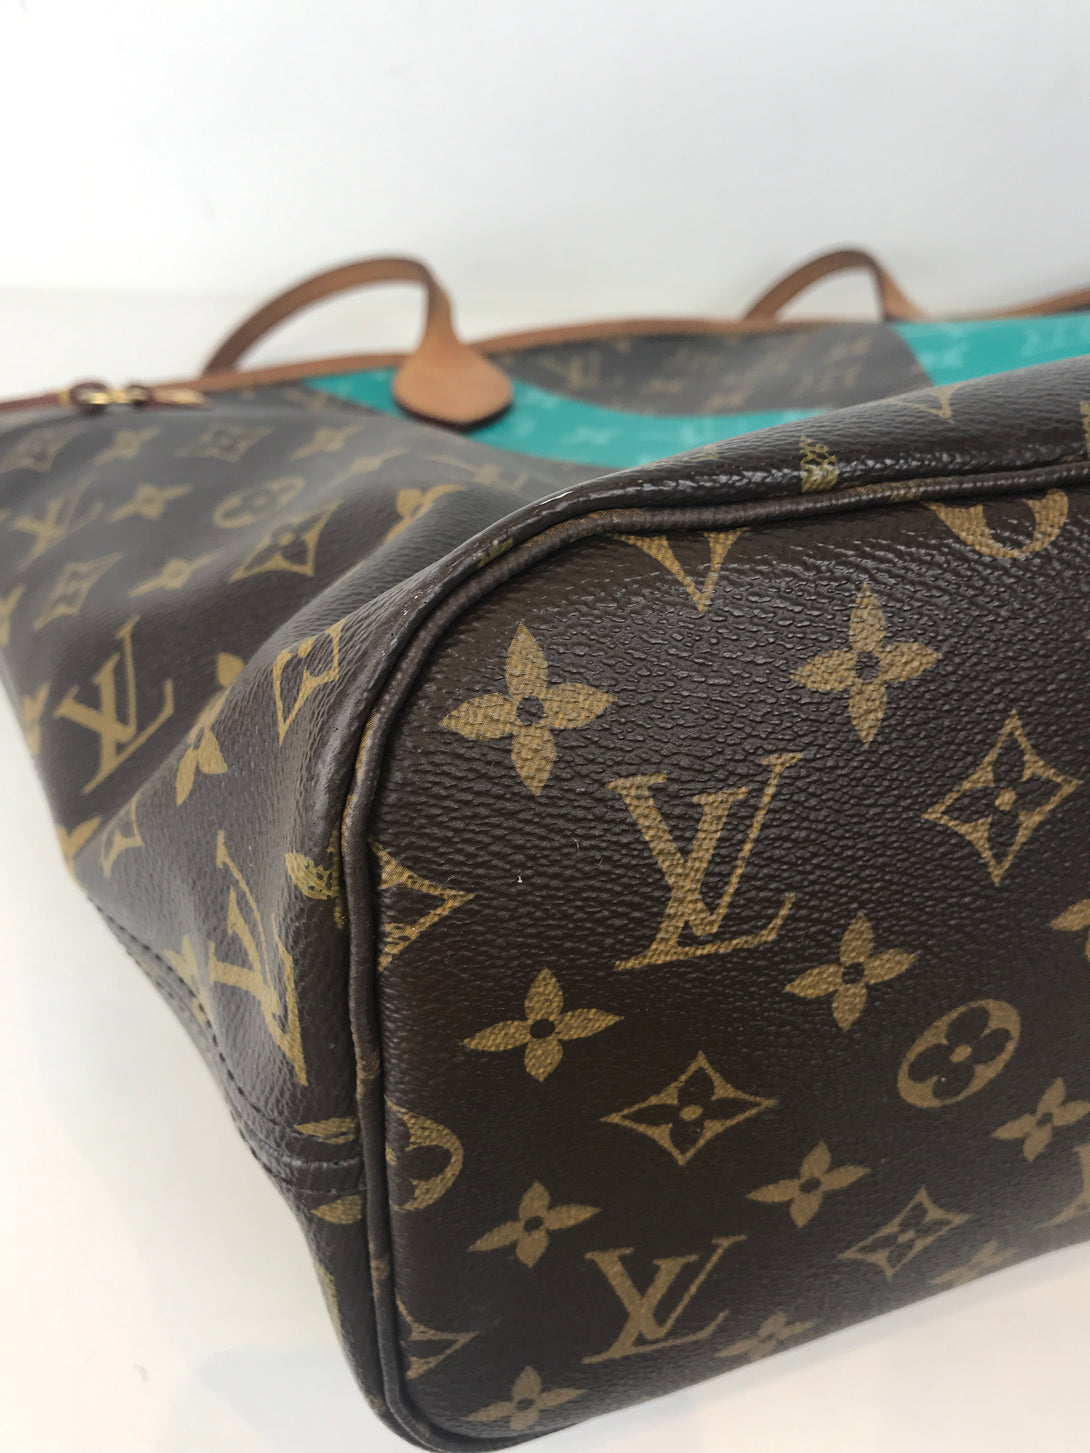 Louis Vuitton Monogram ‘Neverfull’ MM from the "V" Collection - Siopaella Designer Exchange